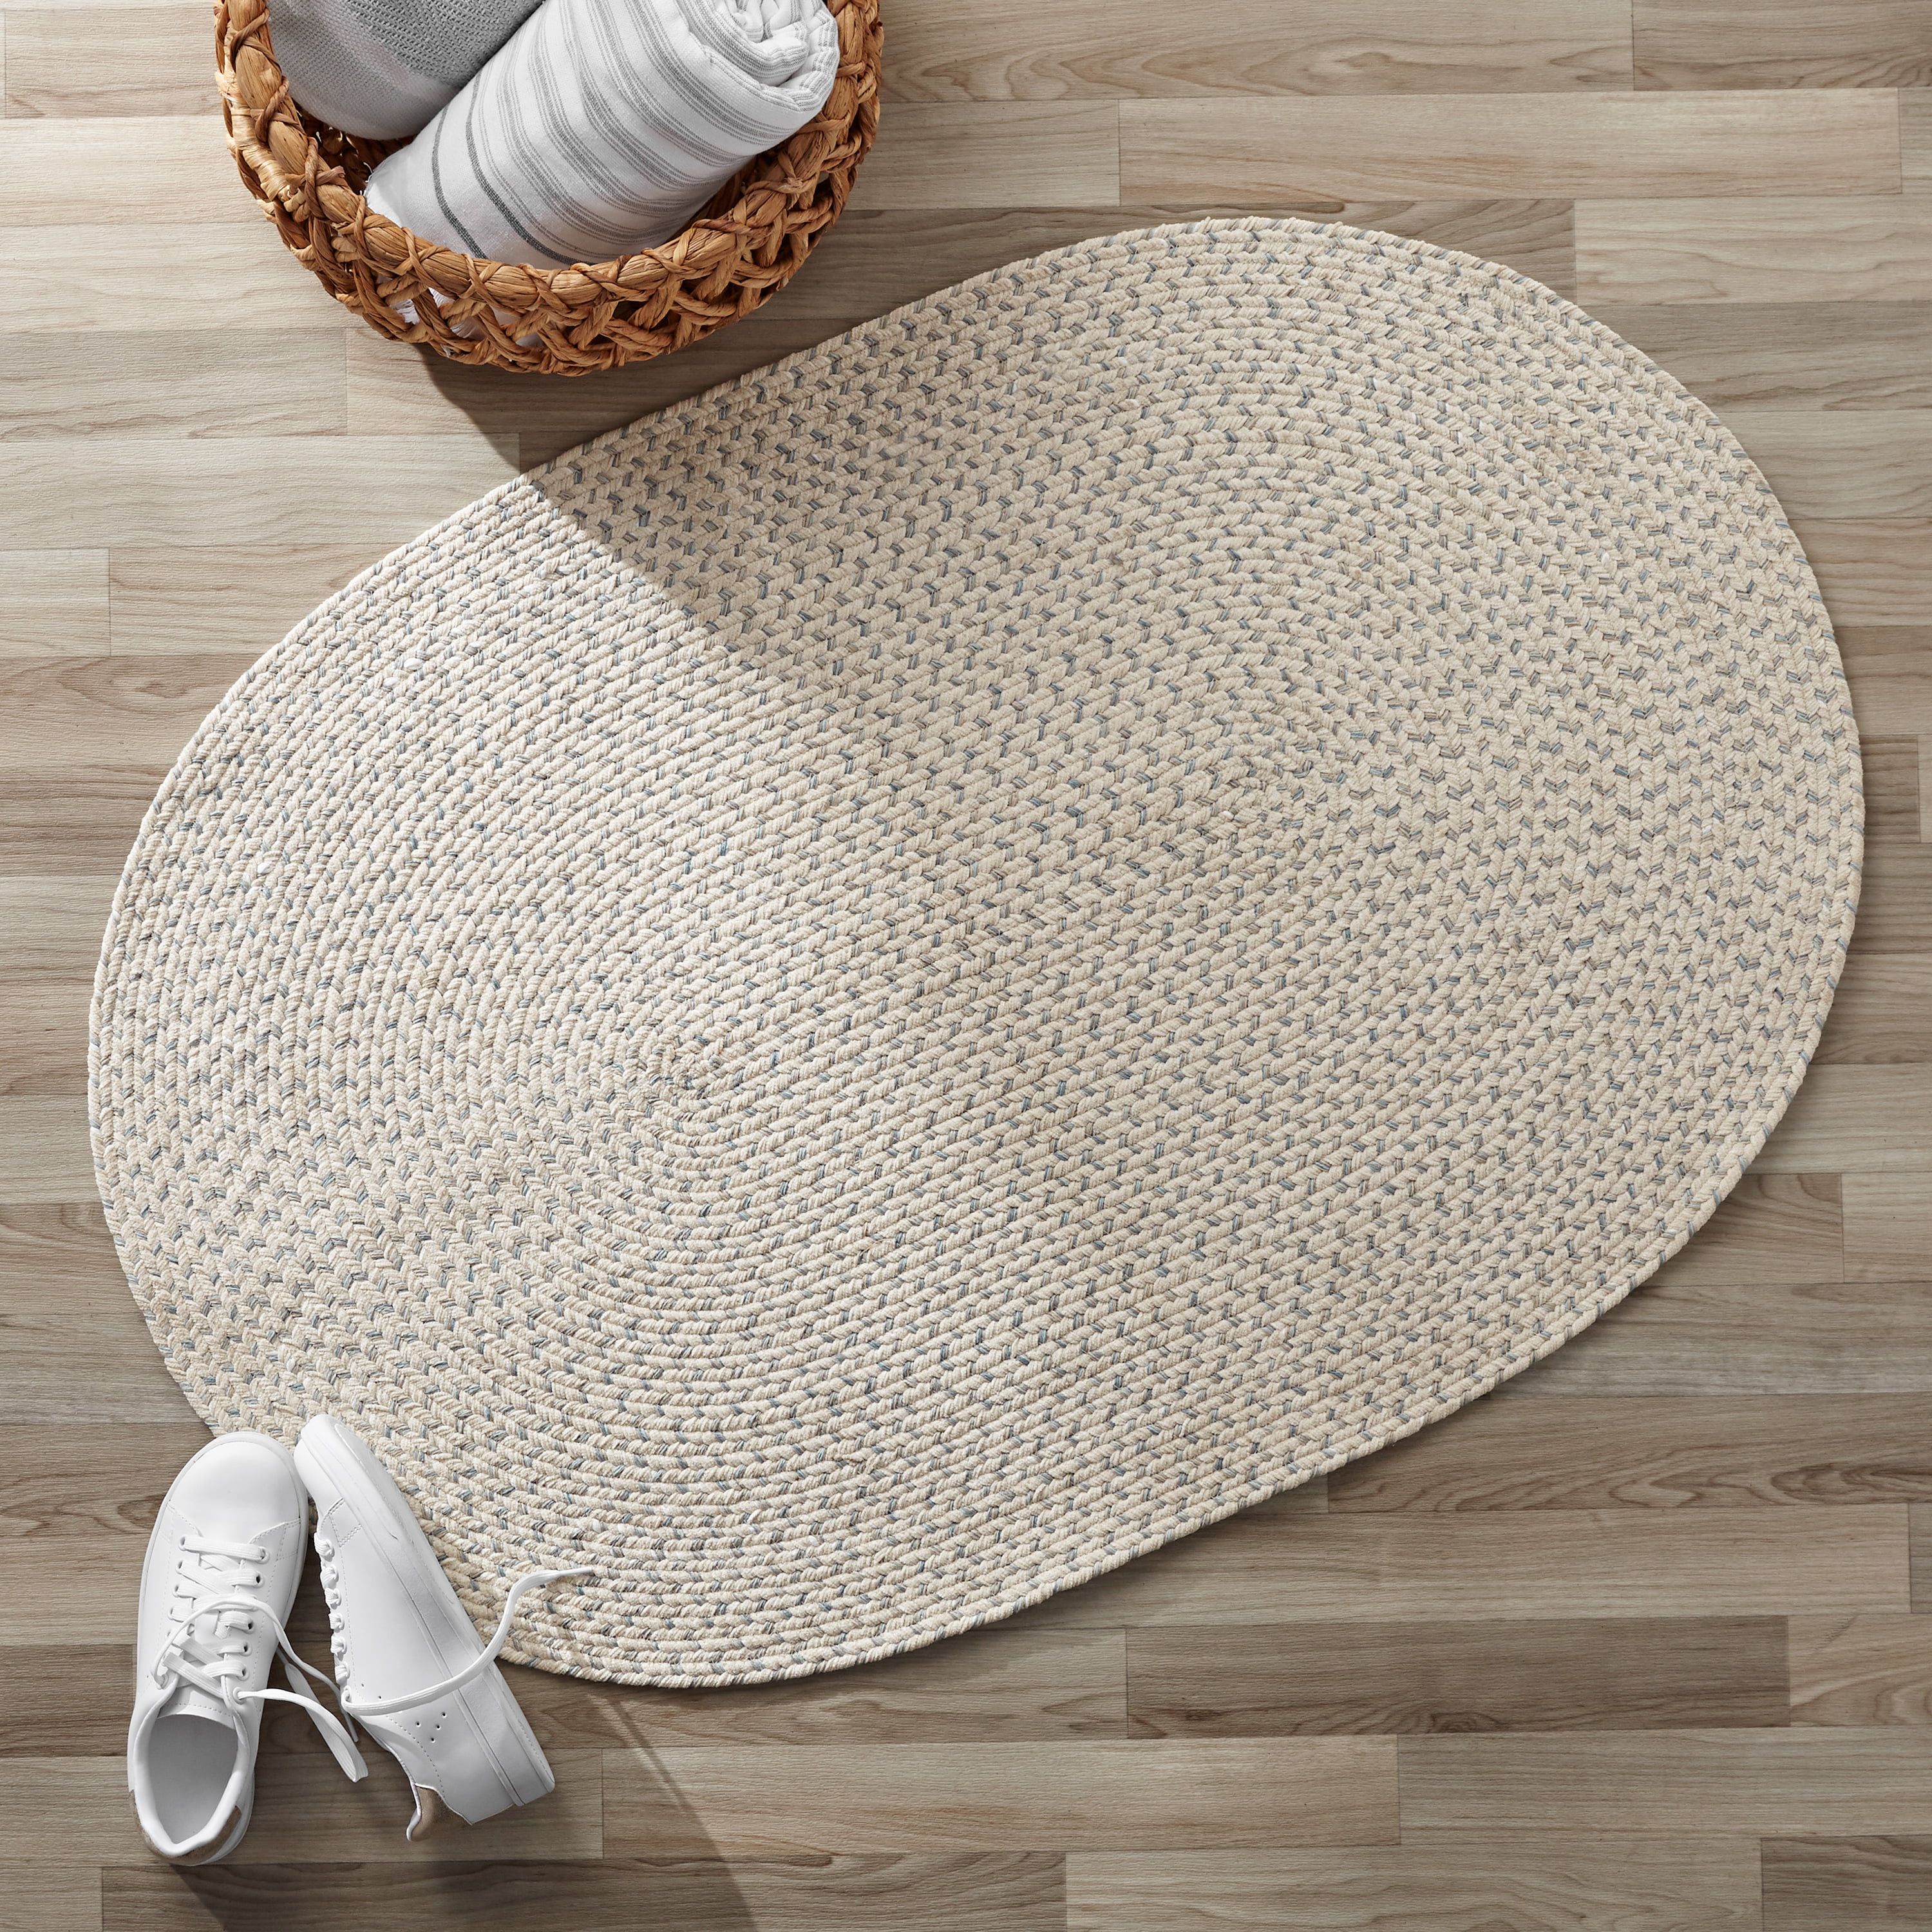 Better Homes & Gardens Braided Oval Accent Rug For Entryway, Ivory Multi,  30" X 44" – Walmart Within Oval Rugs (View 11 of 15)